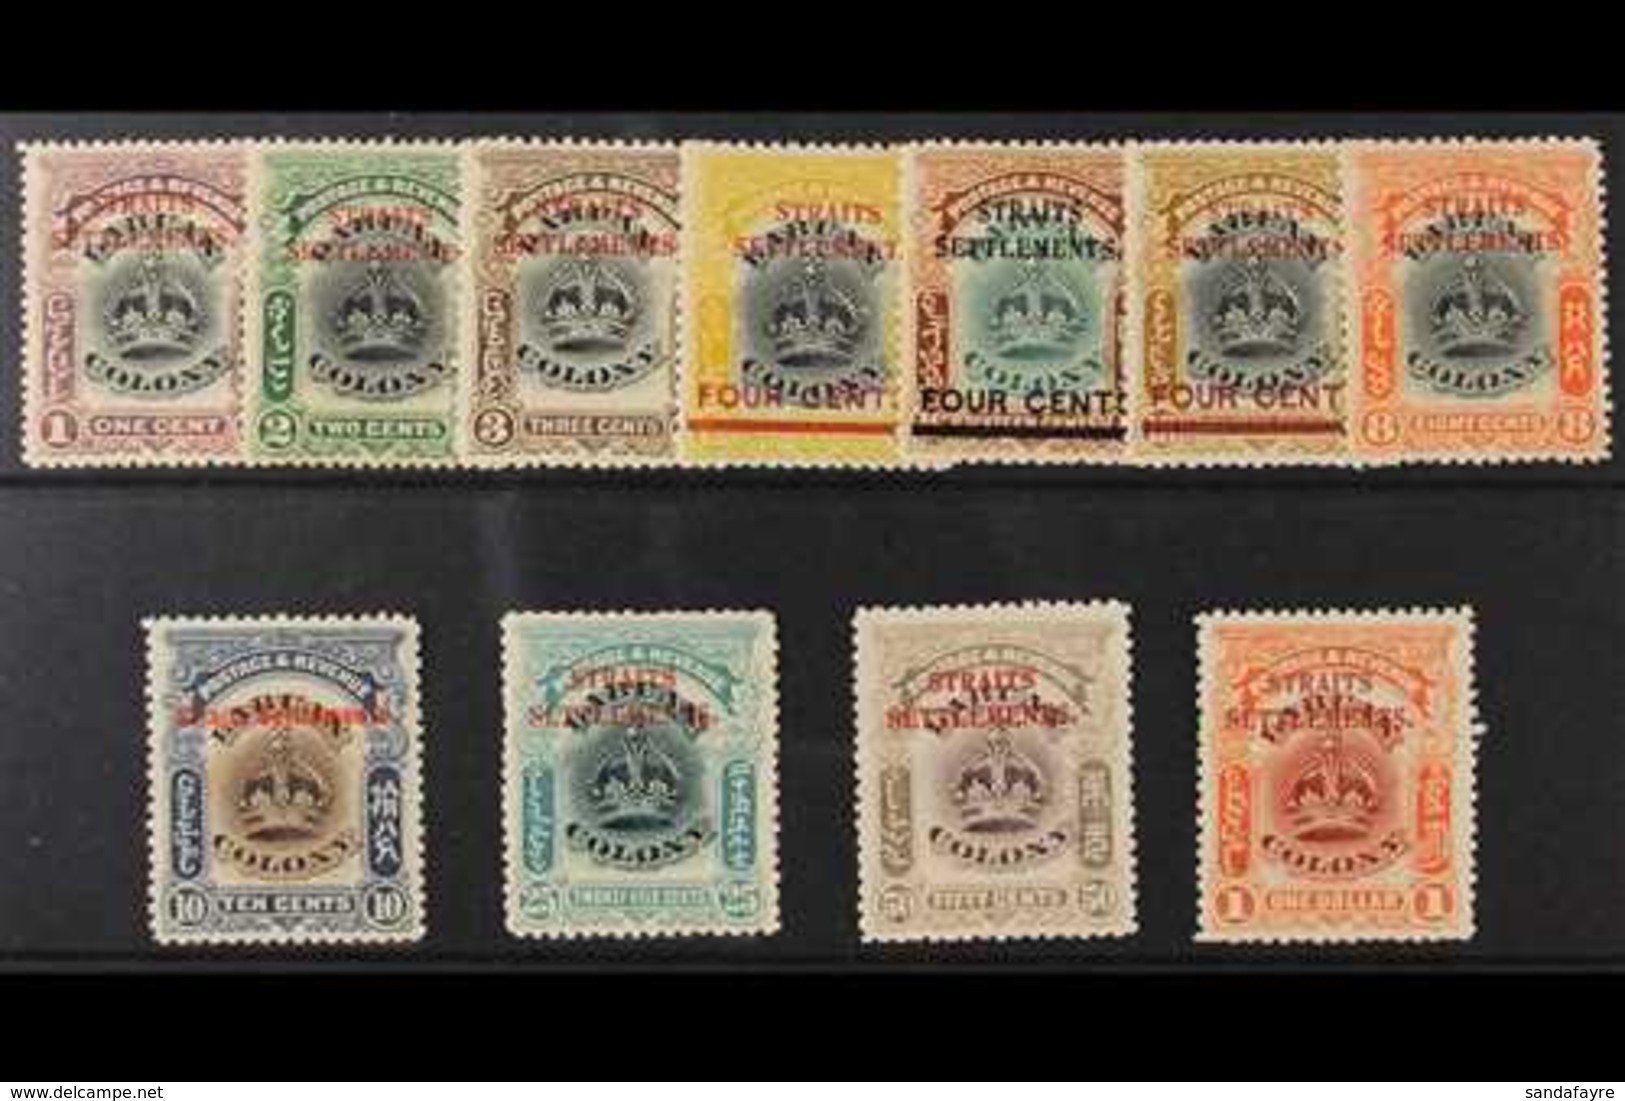 1906 Stamps Of Labuan Overprinted, Complete Set, SG 141/151, Very Fine Mint. (11 Stamps) For More Images, Please Visit H - Straits Settlements